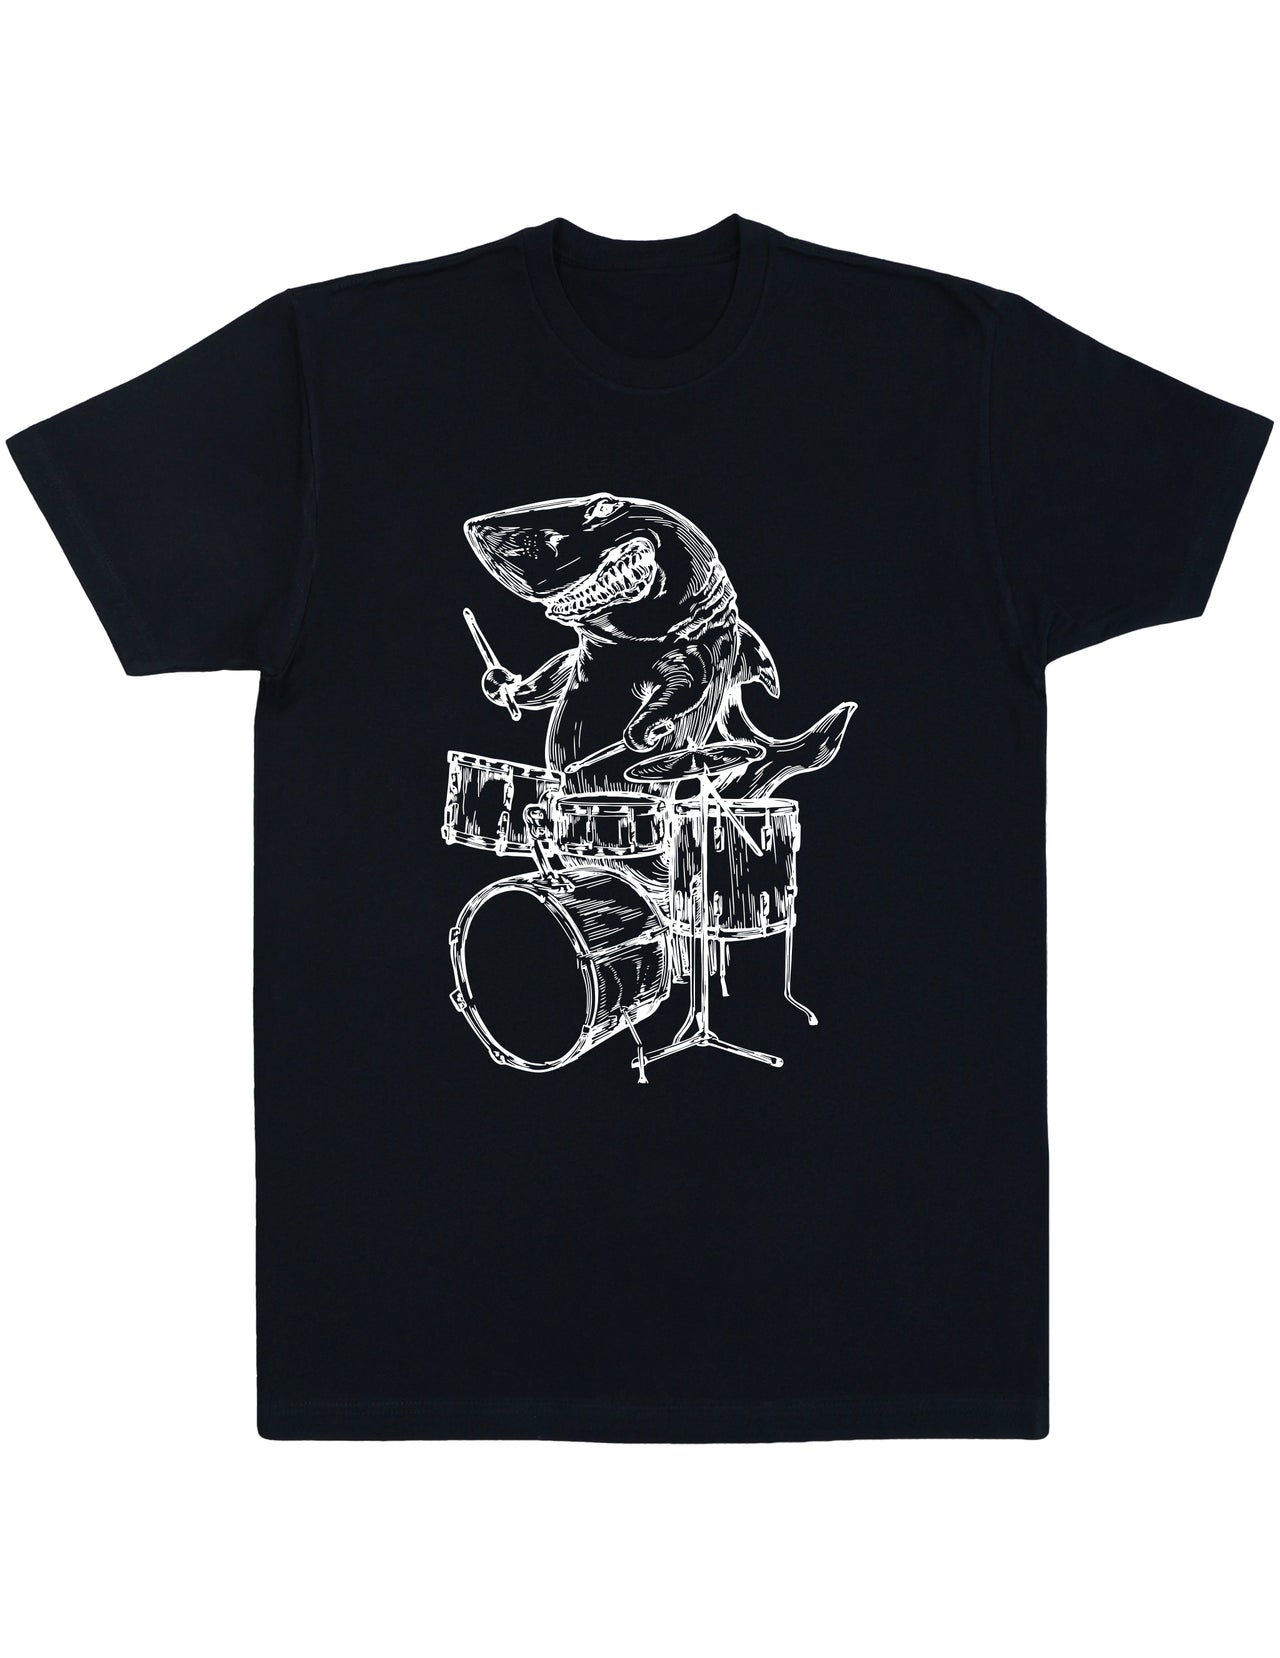 SEEMBO Shark Playing Drums Men's Cotton T-Shirt